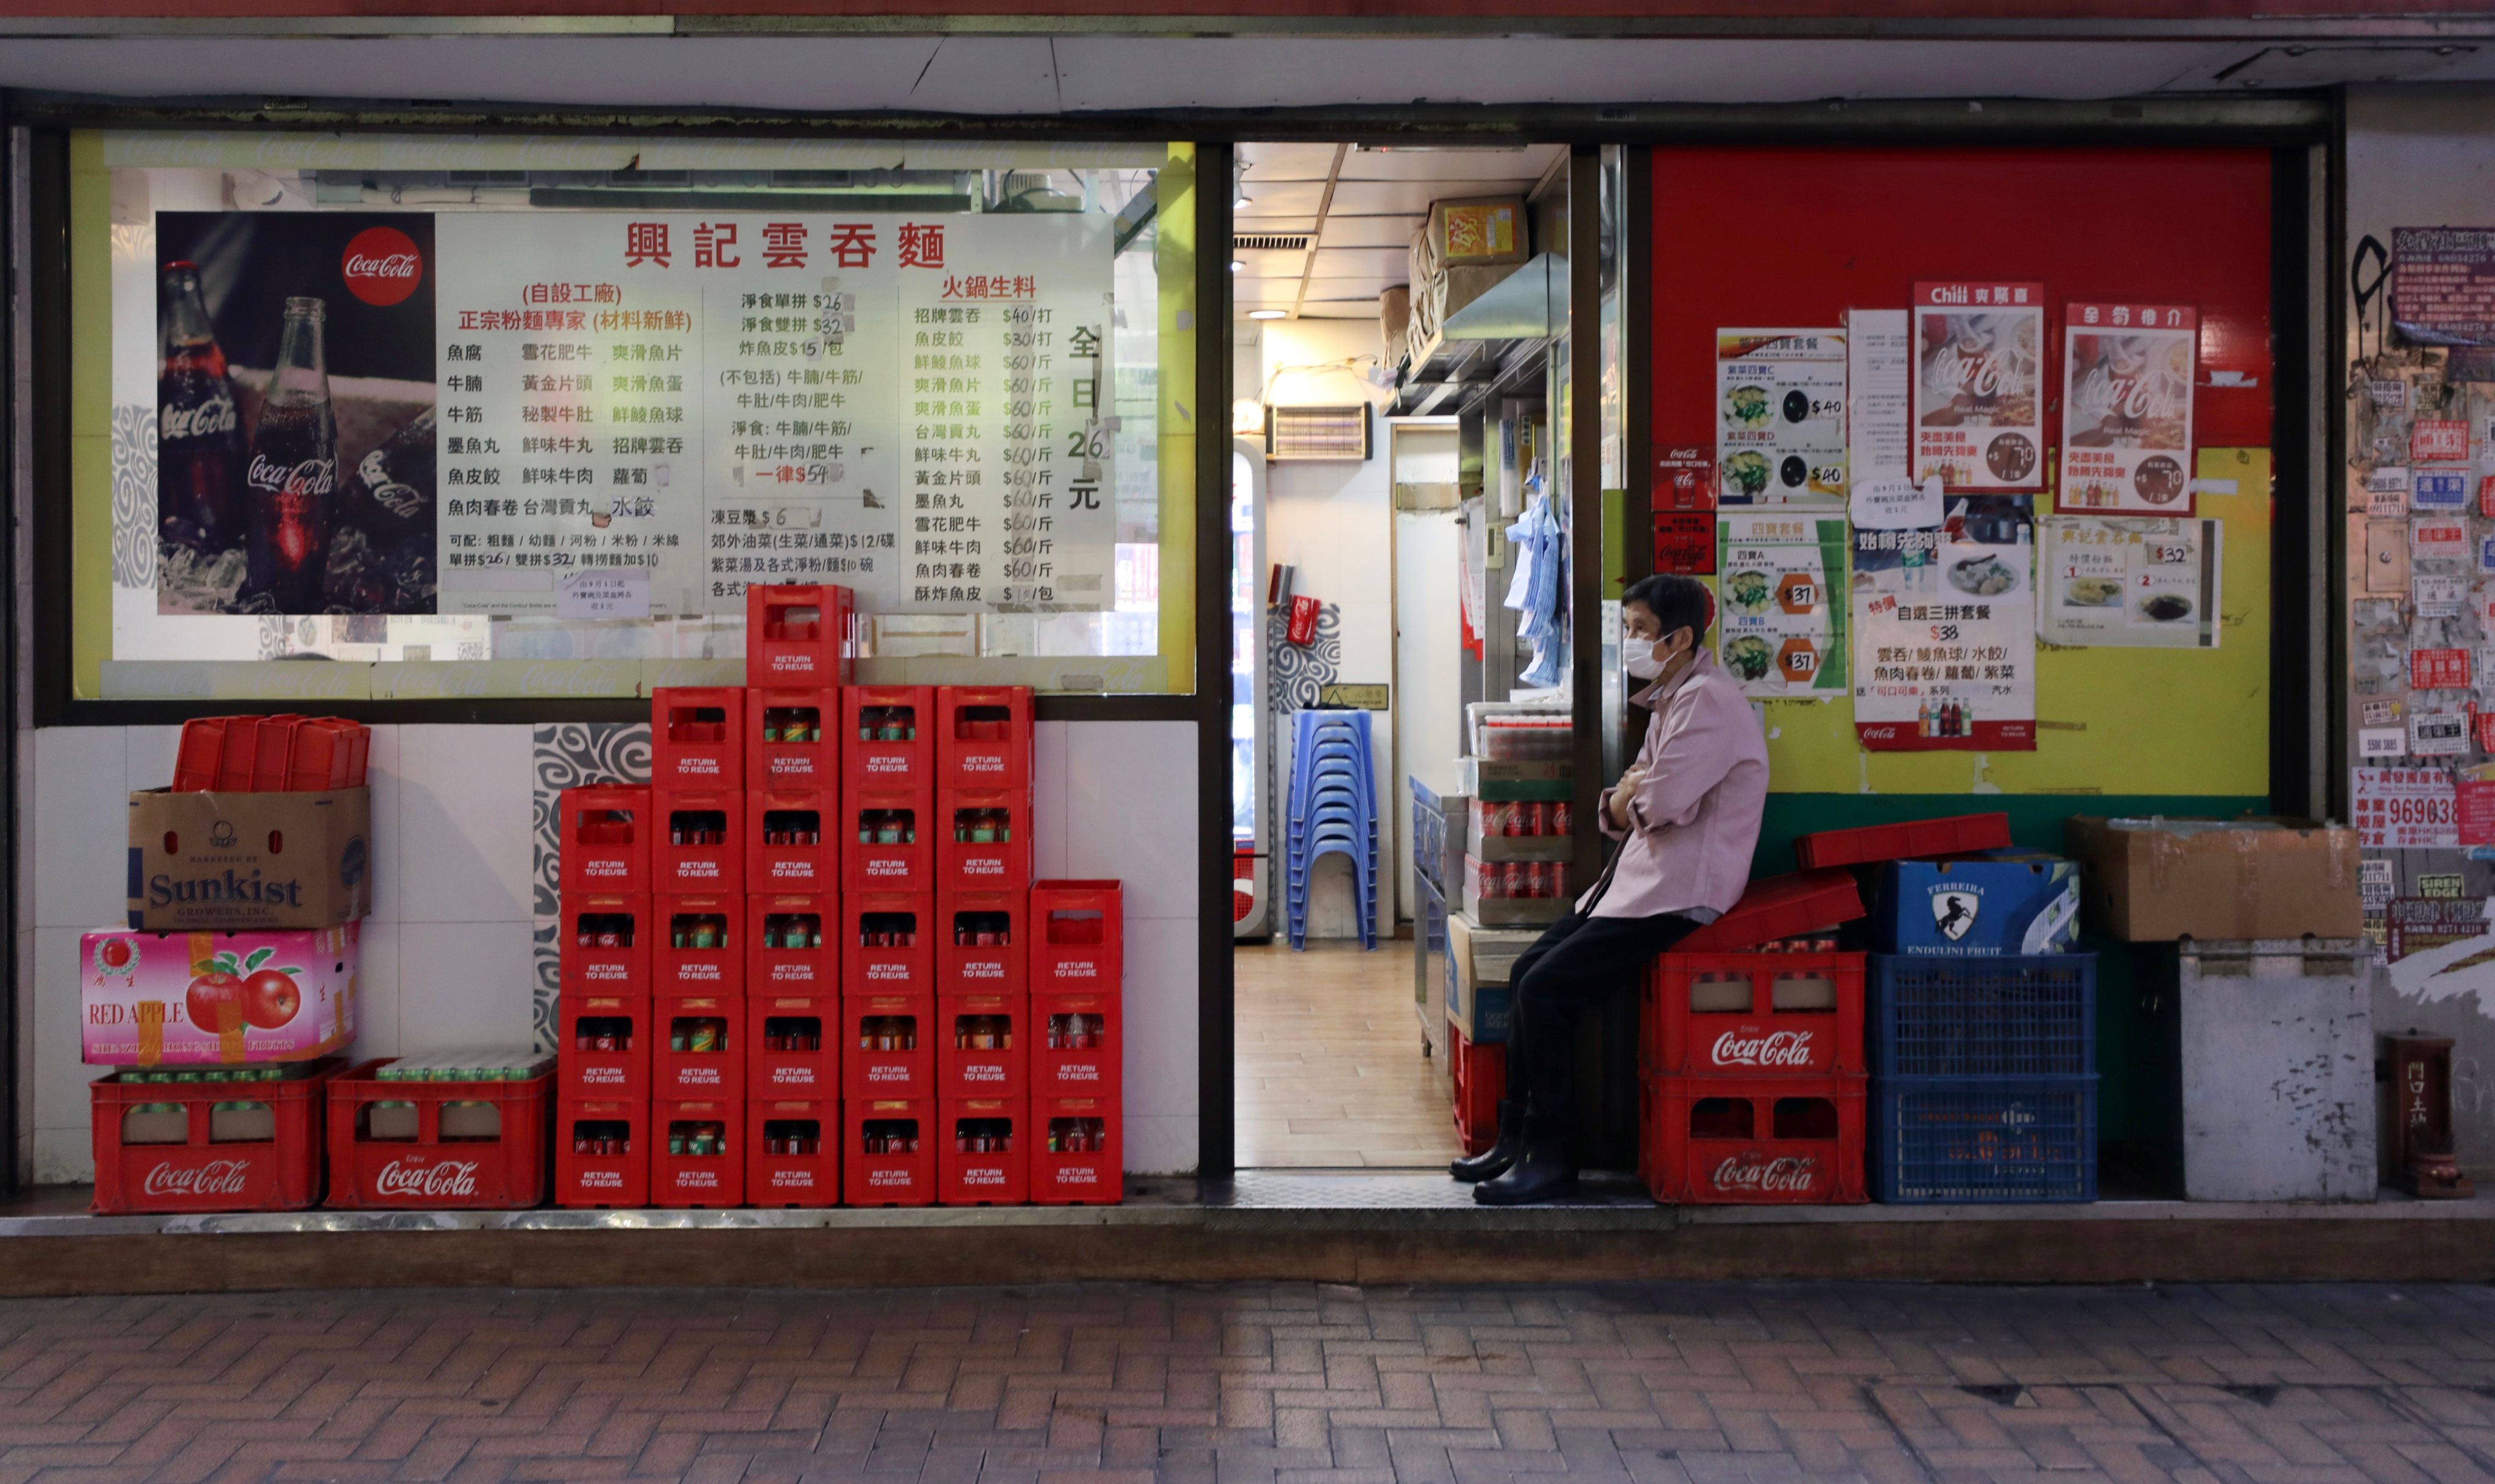 Restaurants are feeling the pinch with a growing trend of Hongkongers heading across the border to spend. Photo: Xiaomei Chen